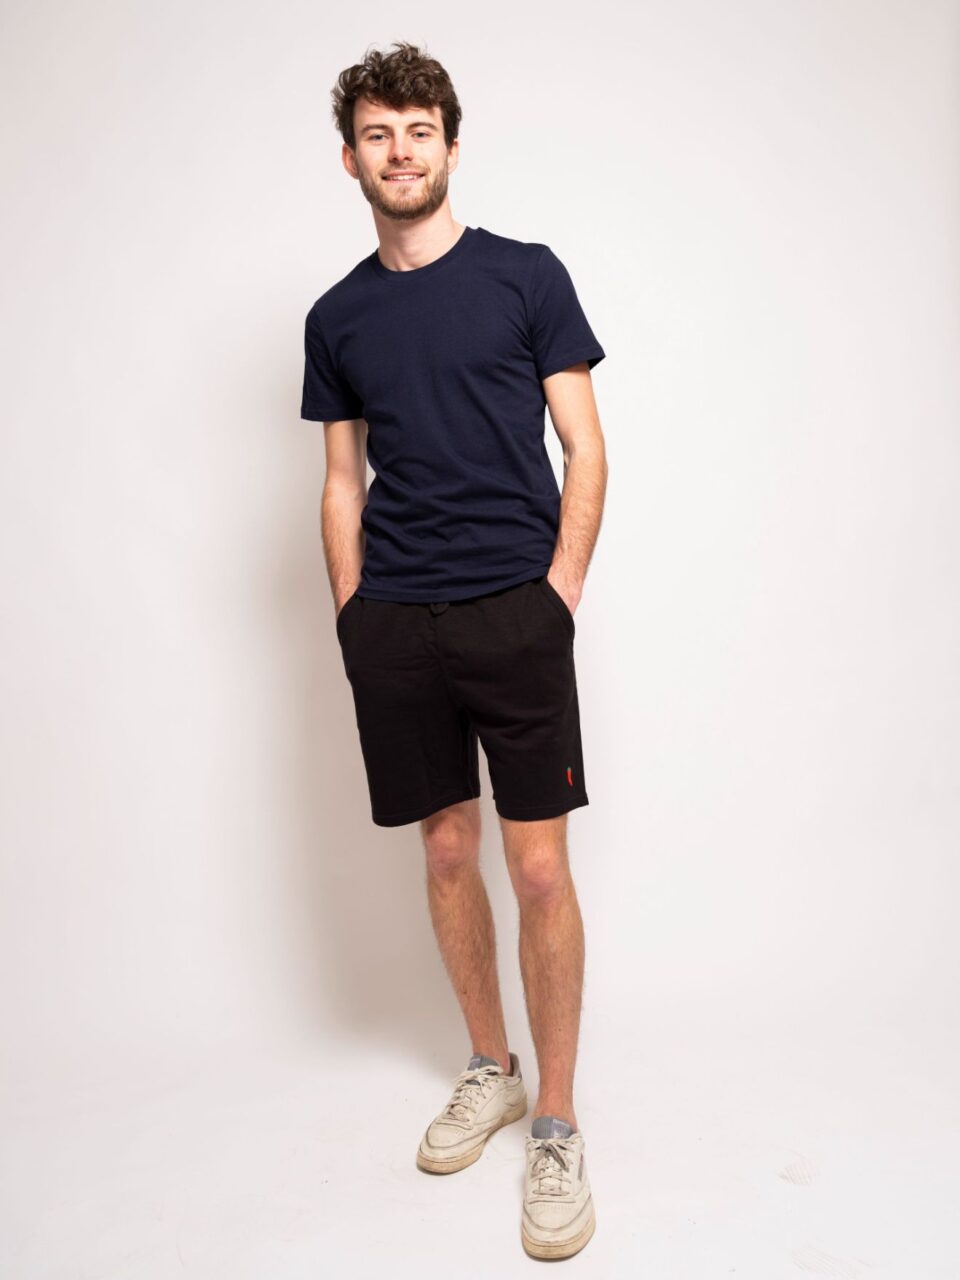 STROM_Black_Shorts_Red Chili_Comfy_Simple